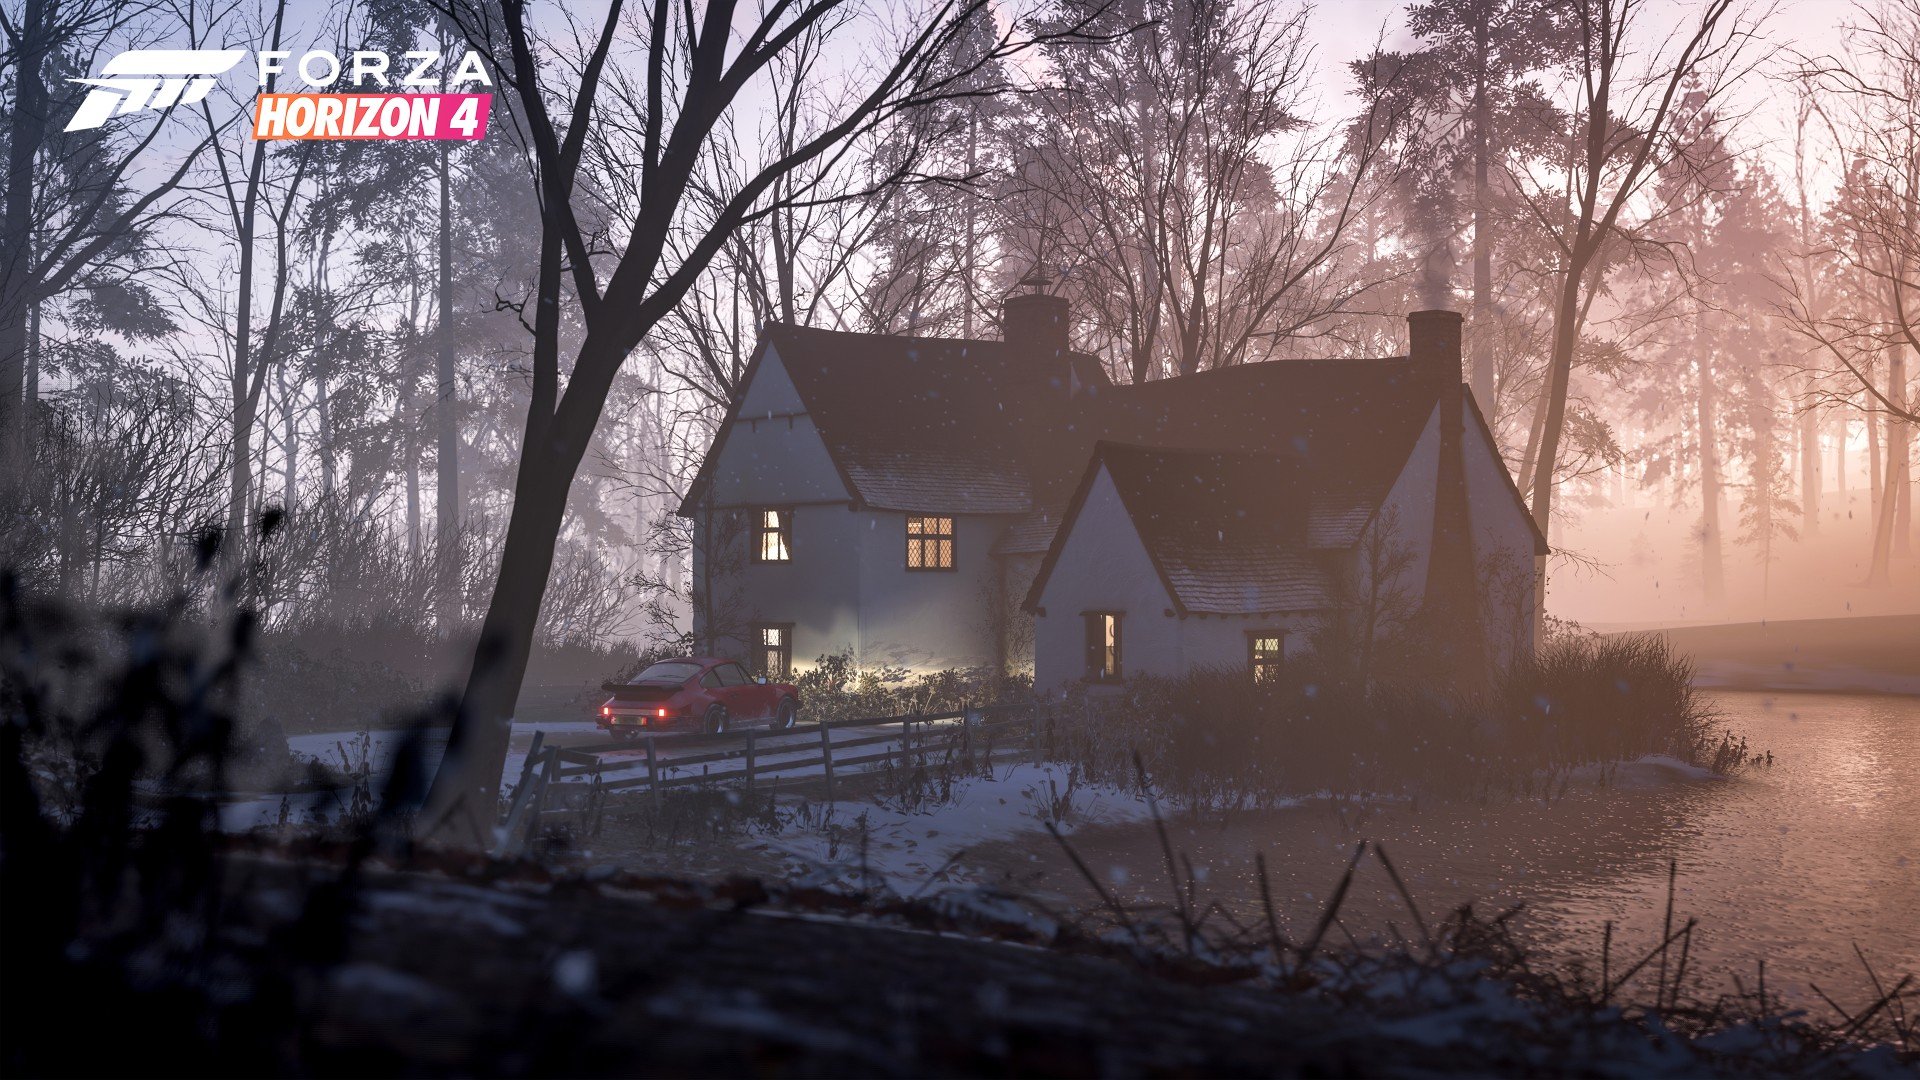 Forza Horizon 4 Demo is now available for free on Windows 10 and Xbox One Forza-Horizon-4_Winter-House-1.jpg